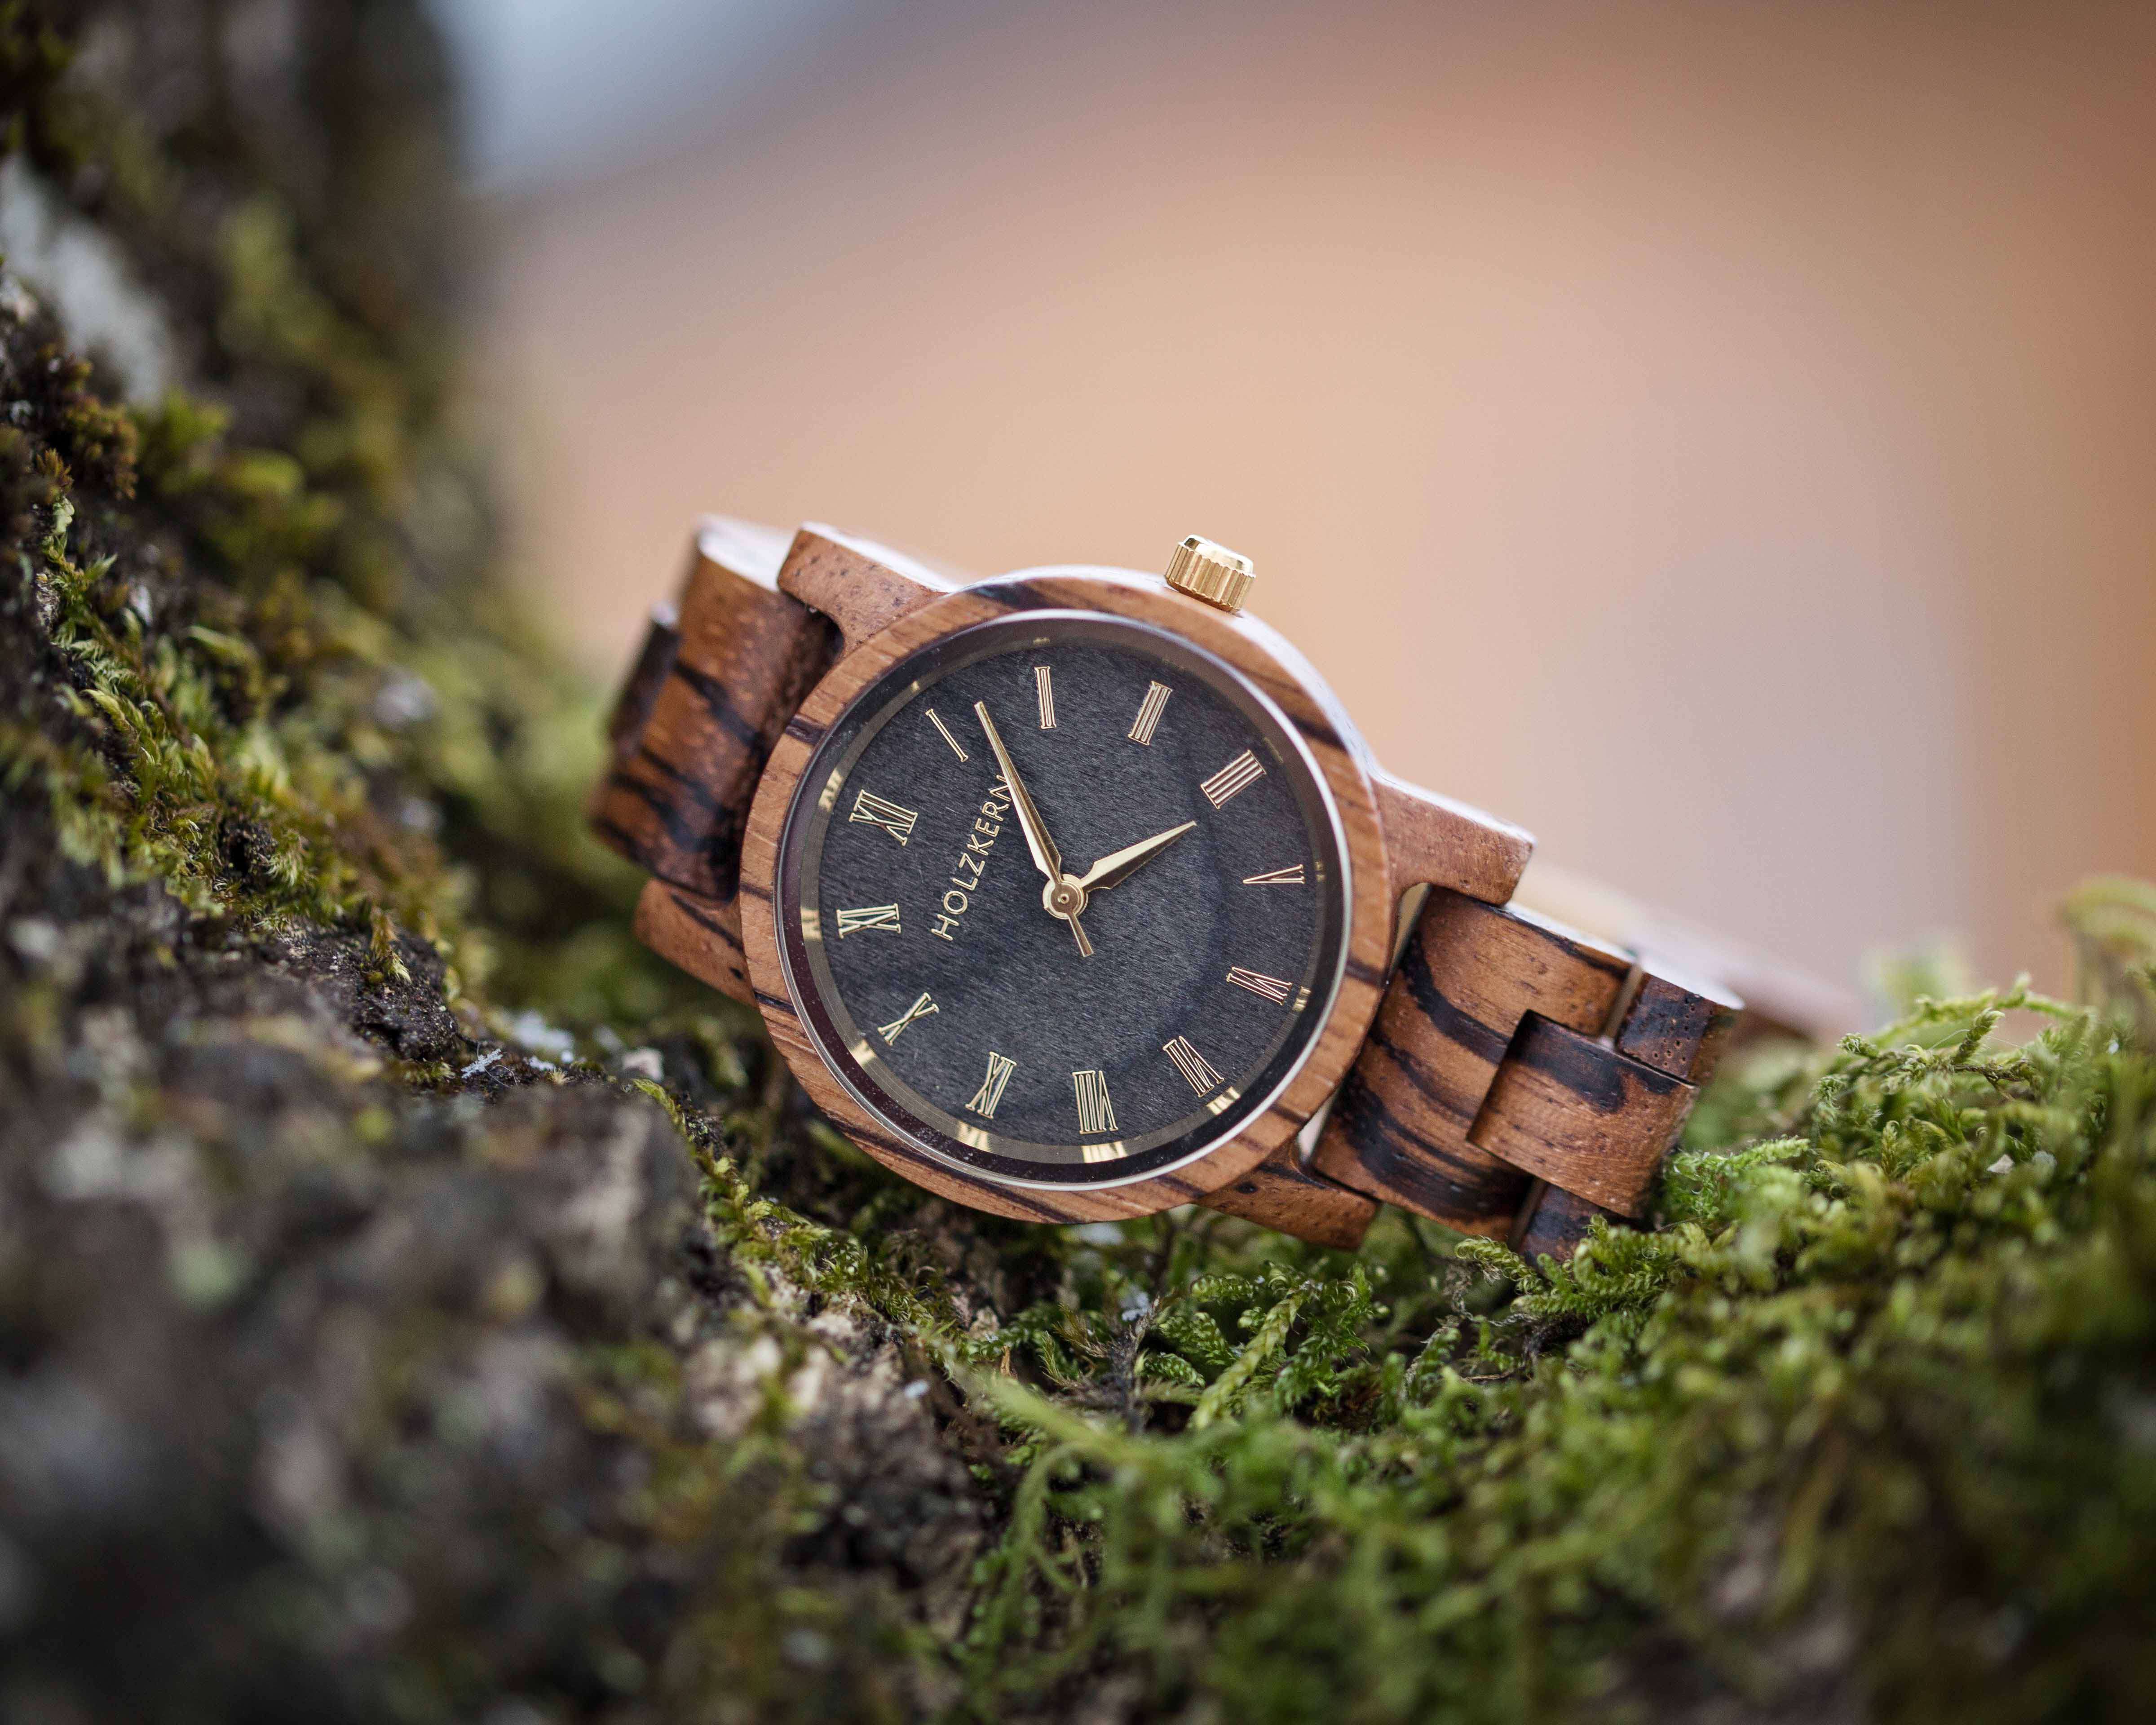 Taboola Ad Example 62212 - Are You A Nature Lover? Then You Can't Miss On The Handcrafted, Wood And Stone Watches By Holzkern!